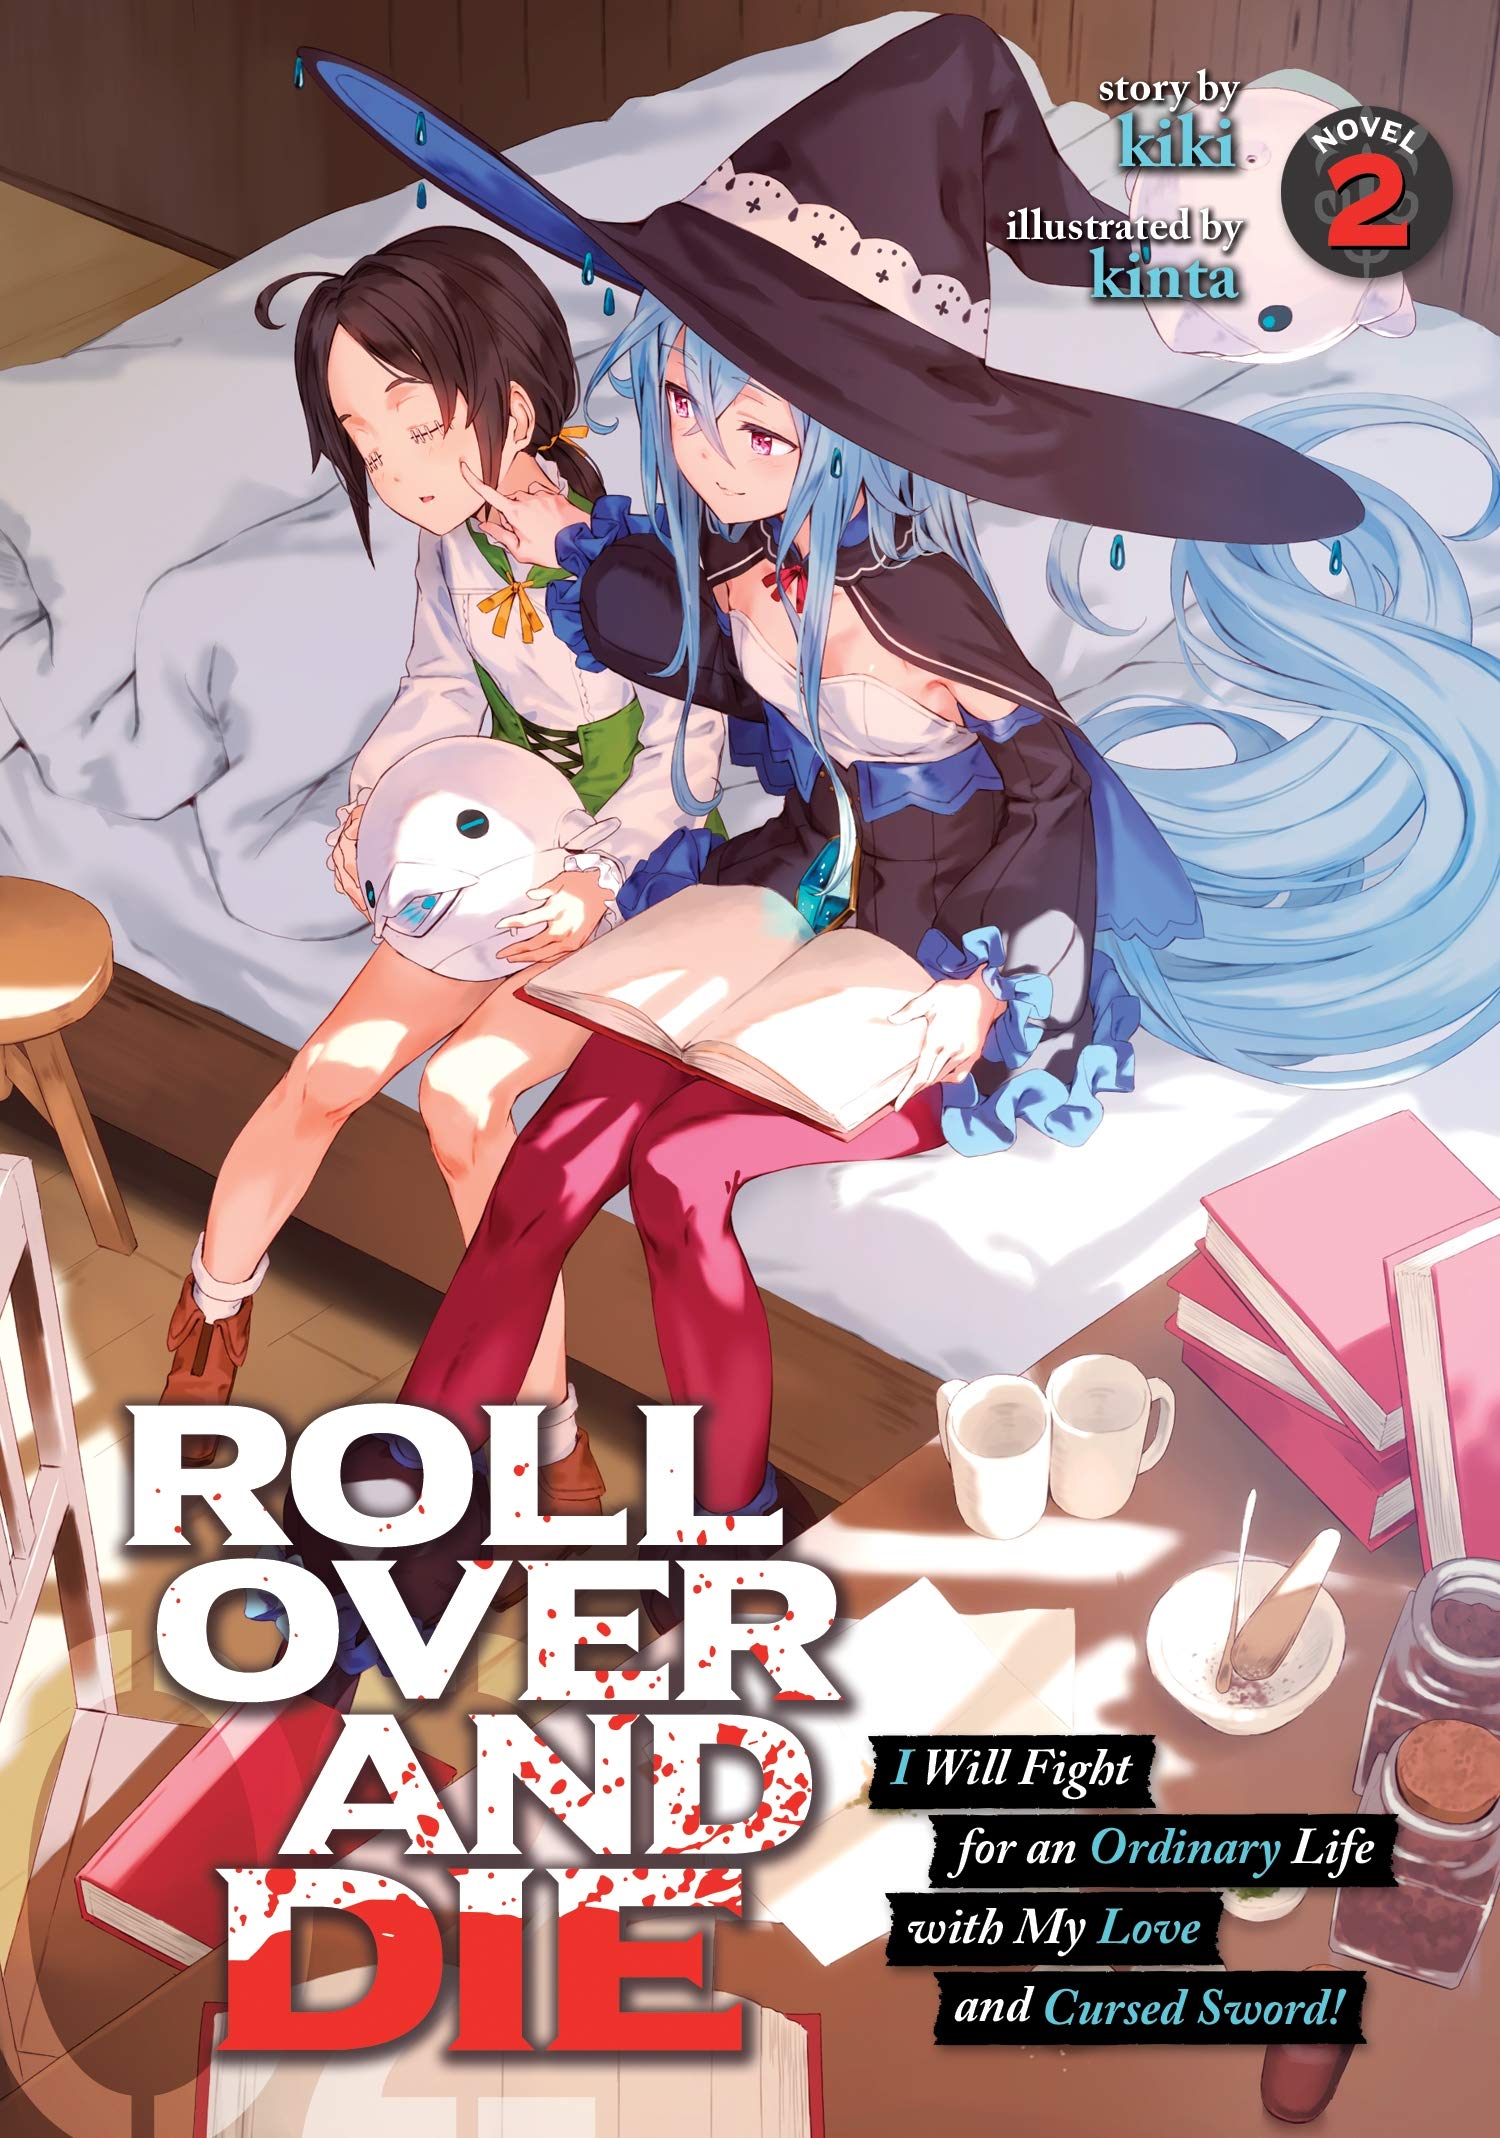 Roll Over And Die: I Will Fight for an Ordinary Life with My Love and Cursed Sword! - Volume 2